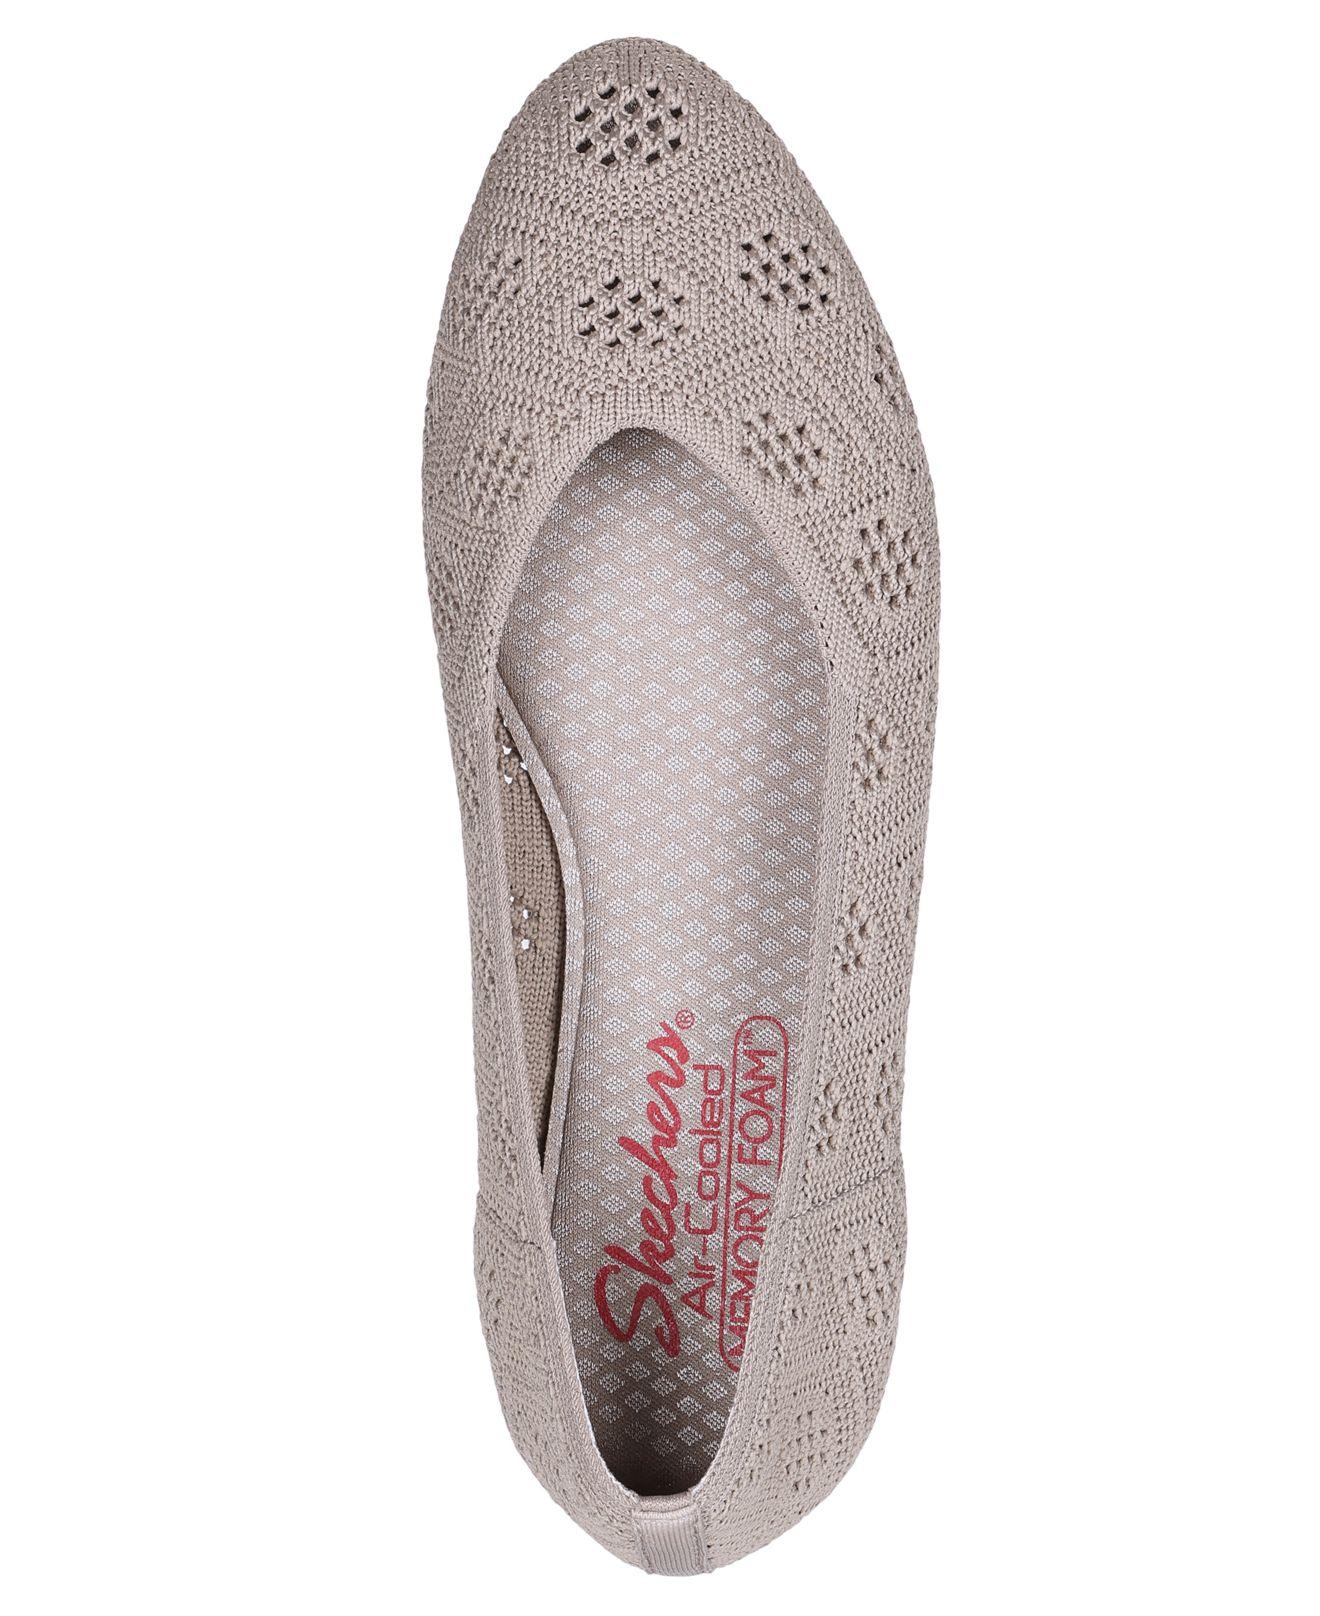 Skechers Cleo 2.0 Slip-on Casual Ballet Flats From Finish Line in Gray |  Lyst